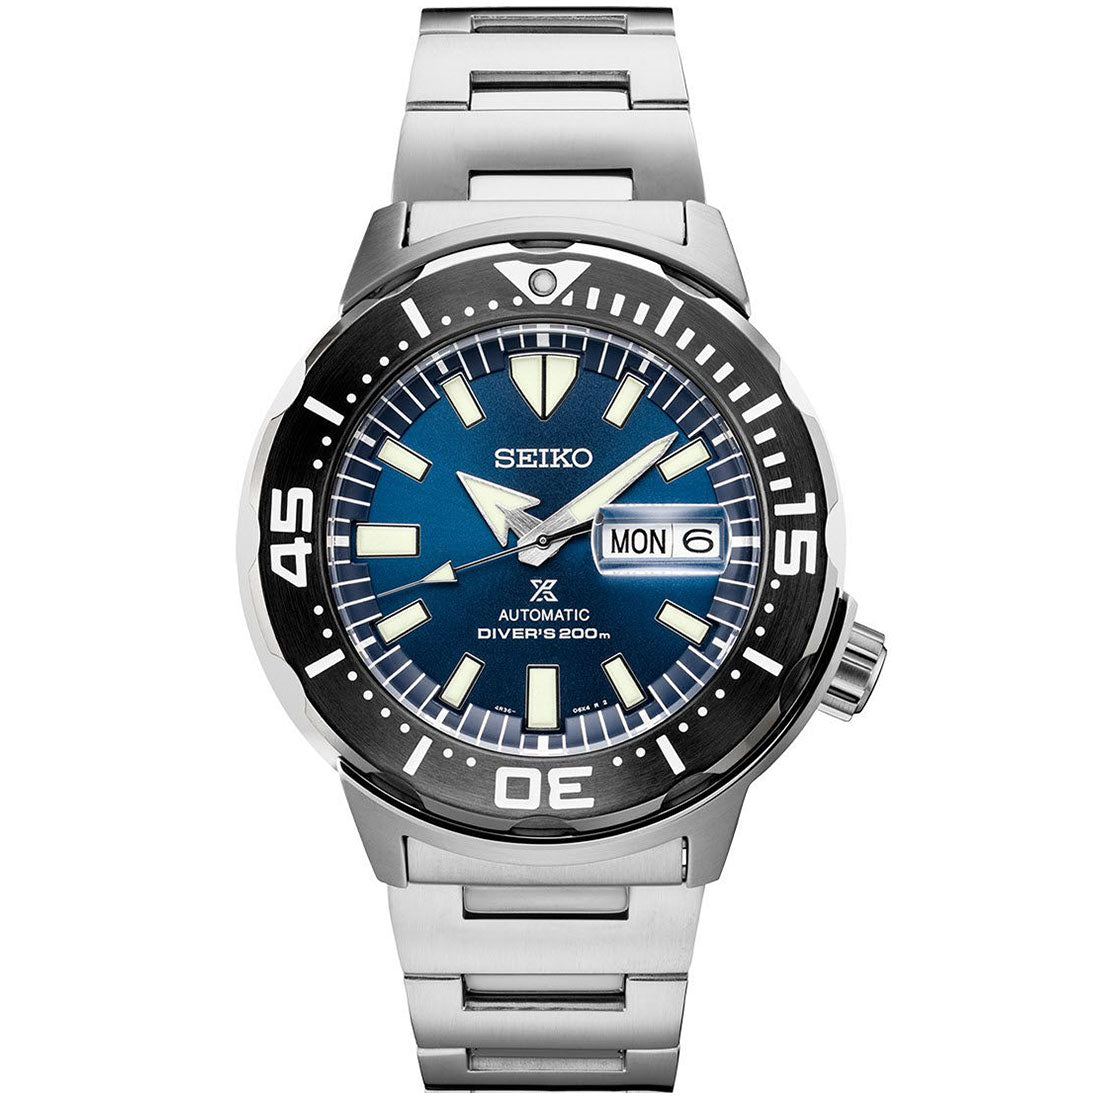 Seiko SRPD25K1 SRPD25 Prospex Blue Dial Stainless Diving Watch ...